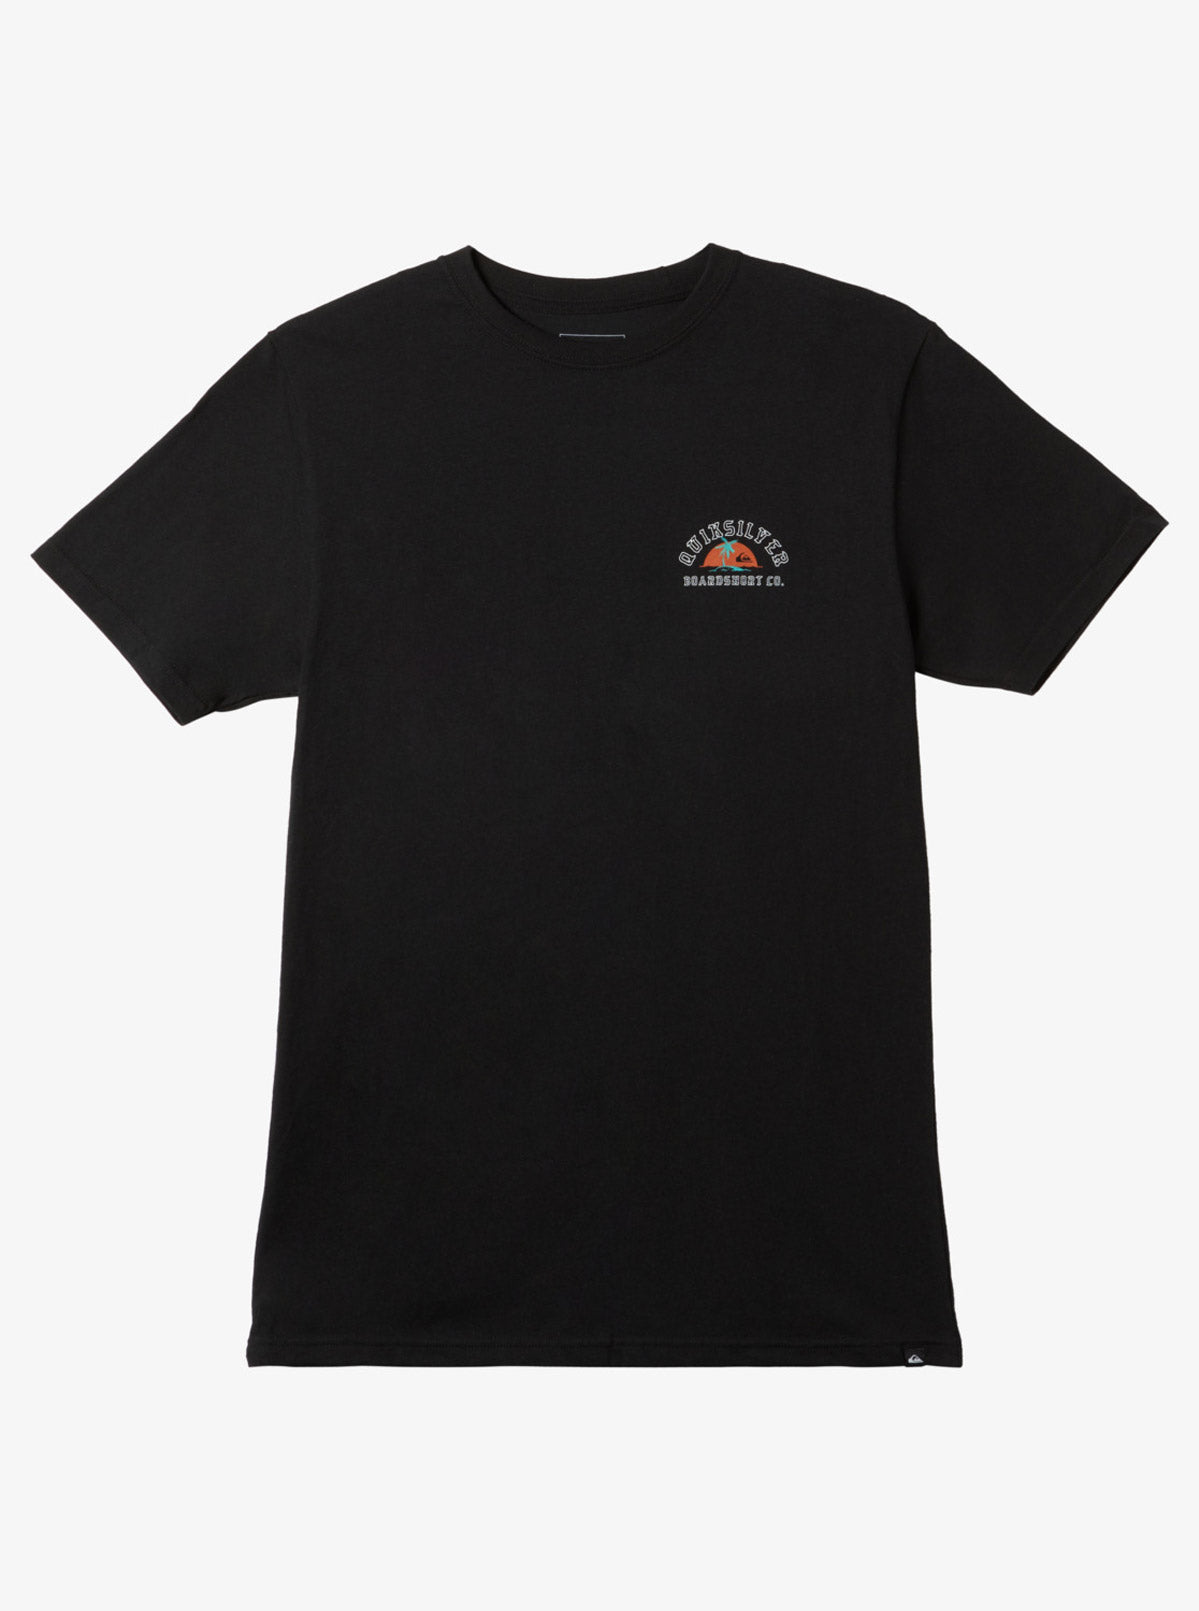 Quiksilver: Alone At Last T-Shirt